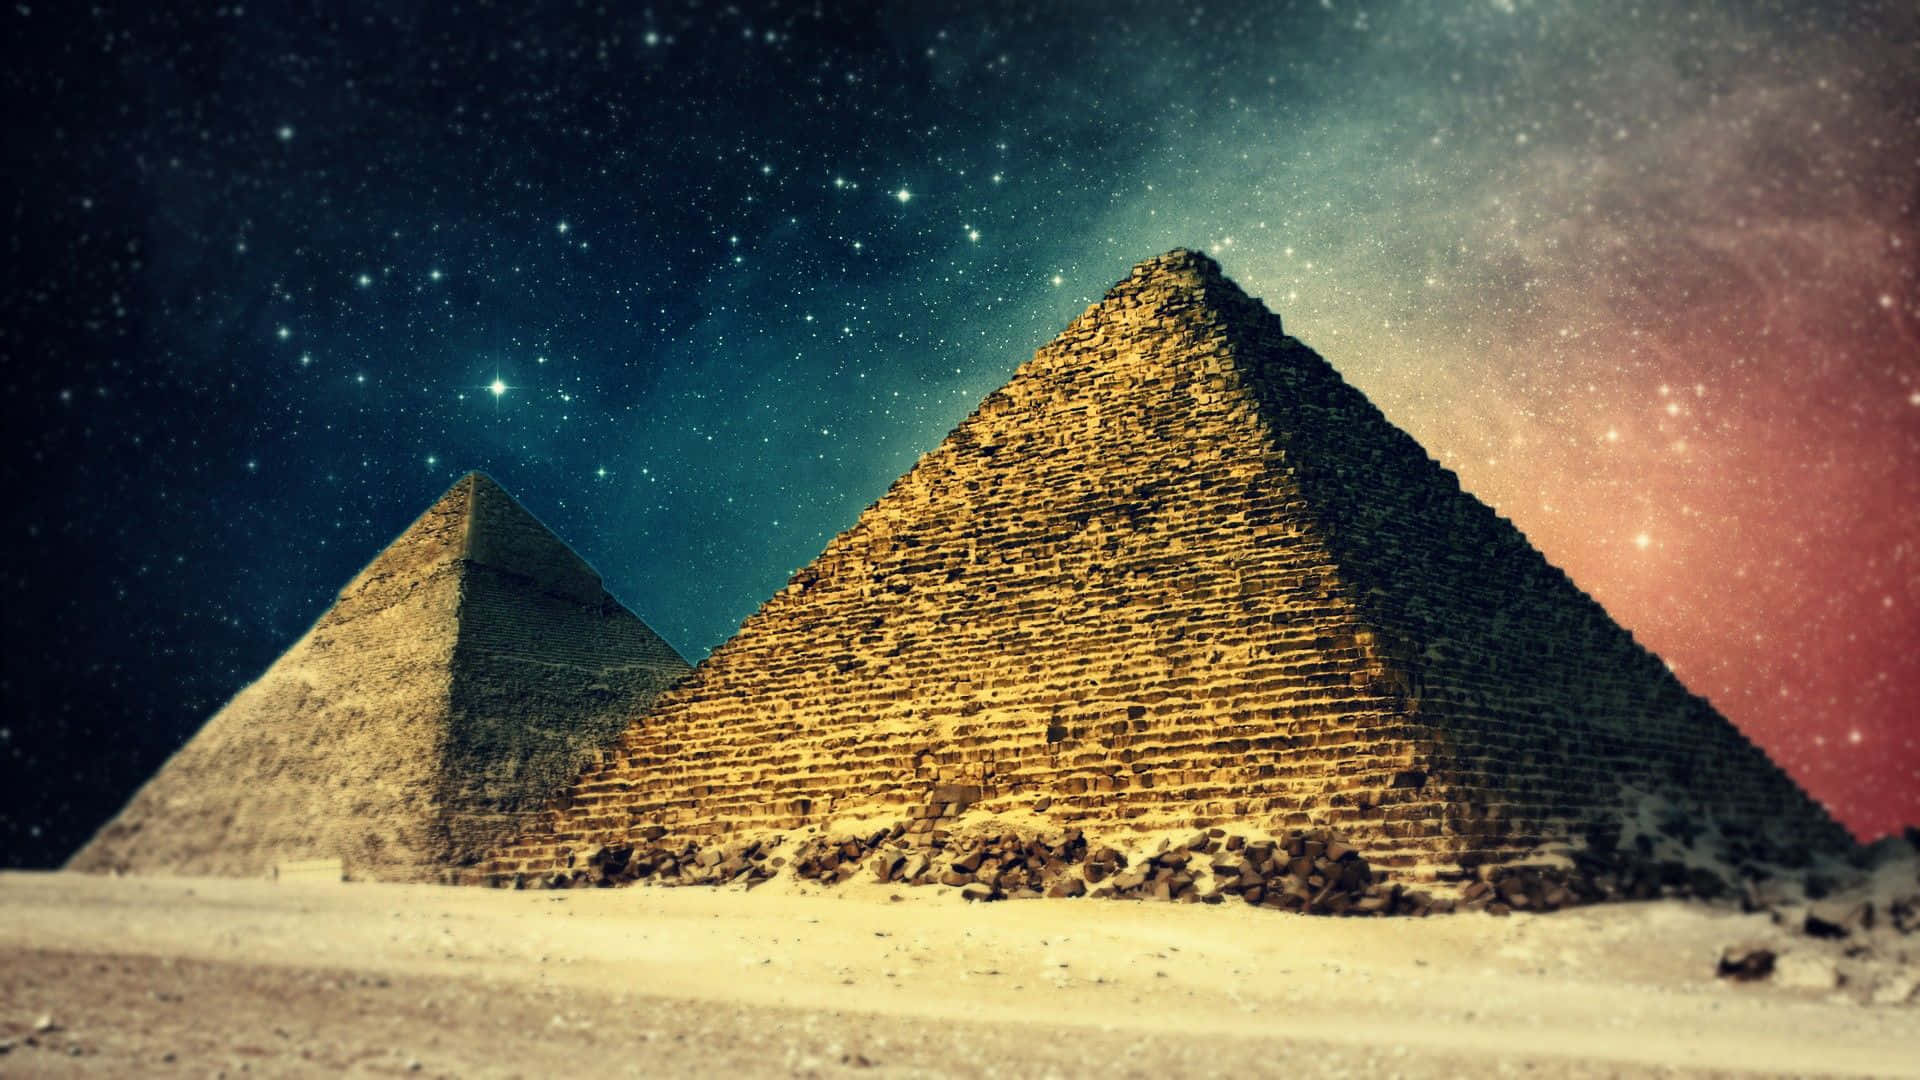 Three Pyramids In The Desert With Stars In The Sky Wallpaper